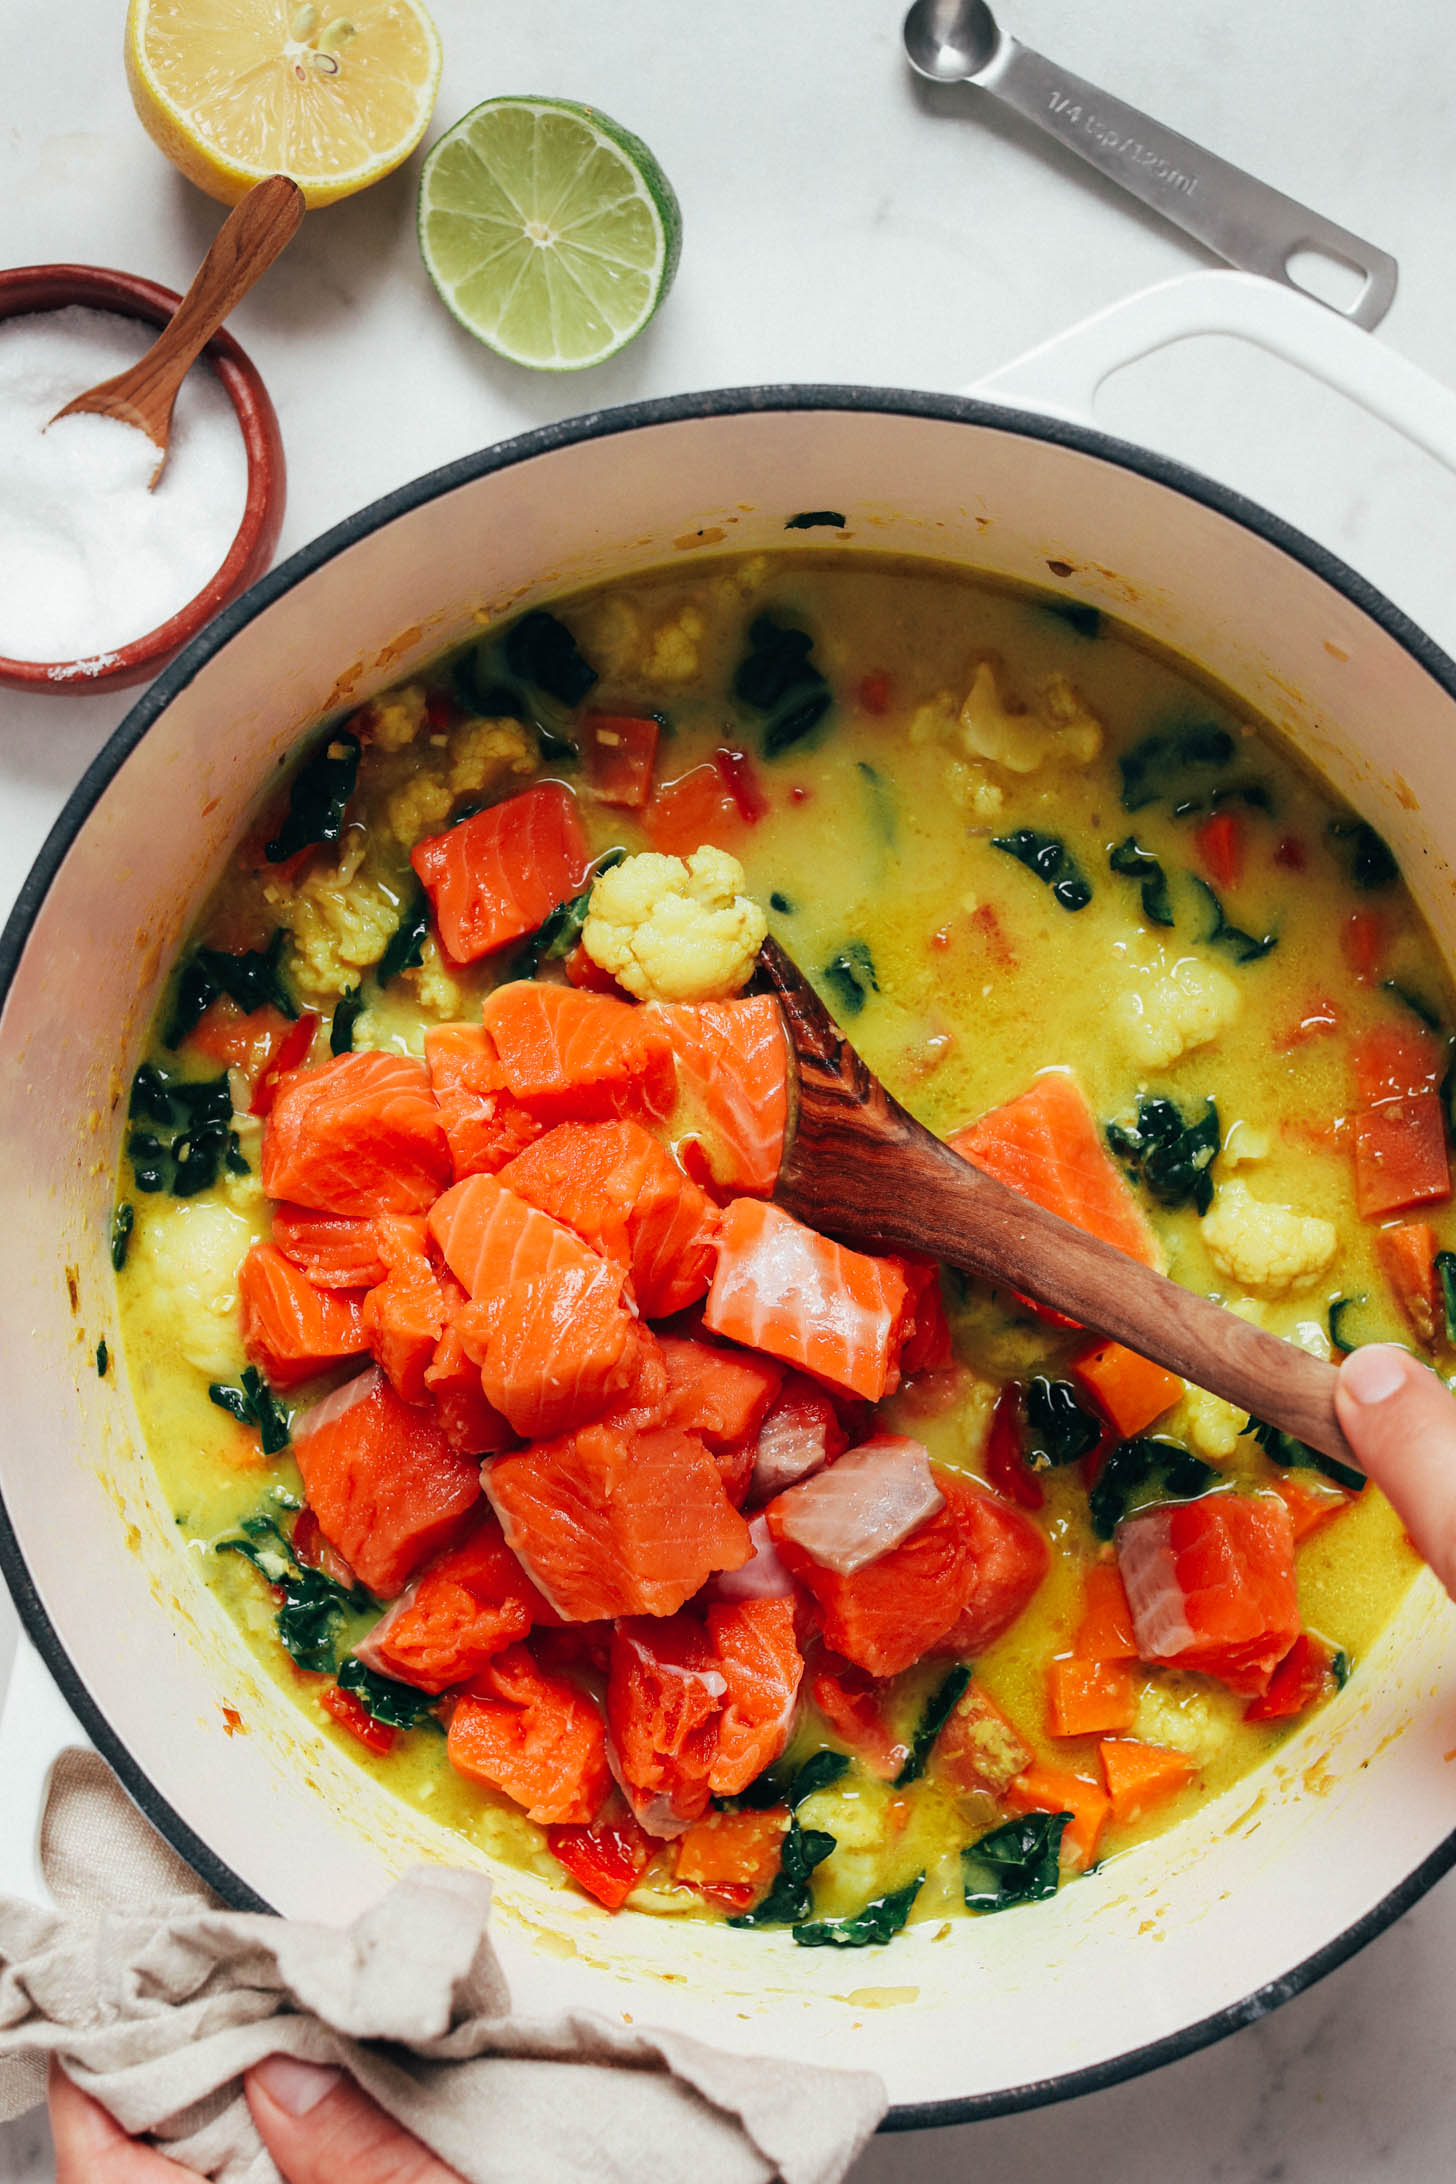 Stirring cubed salmon into green curry